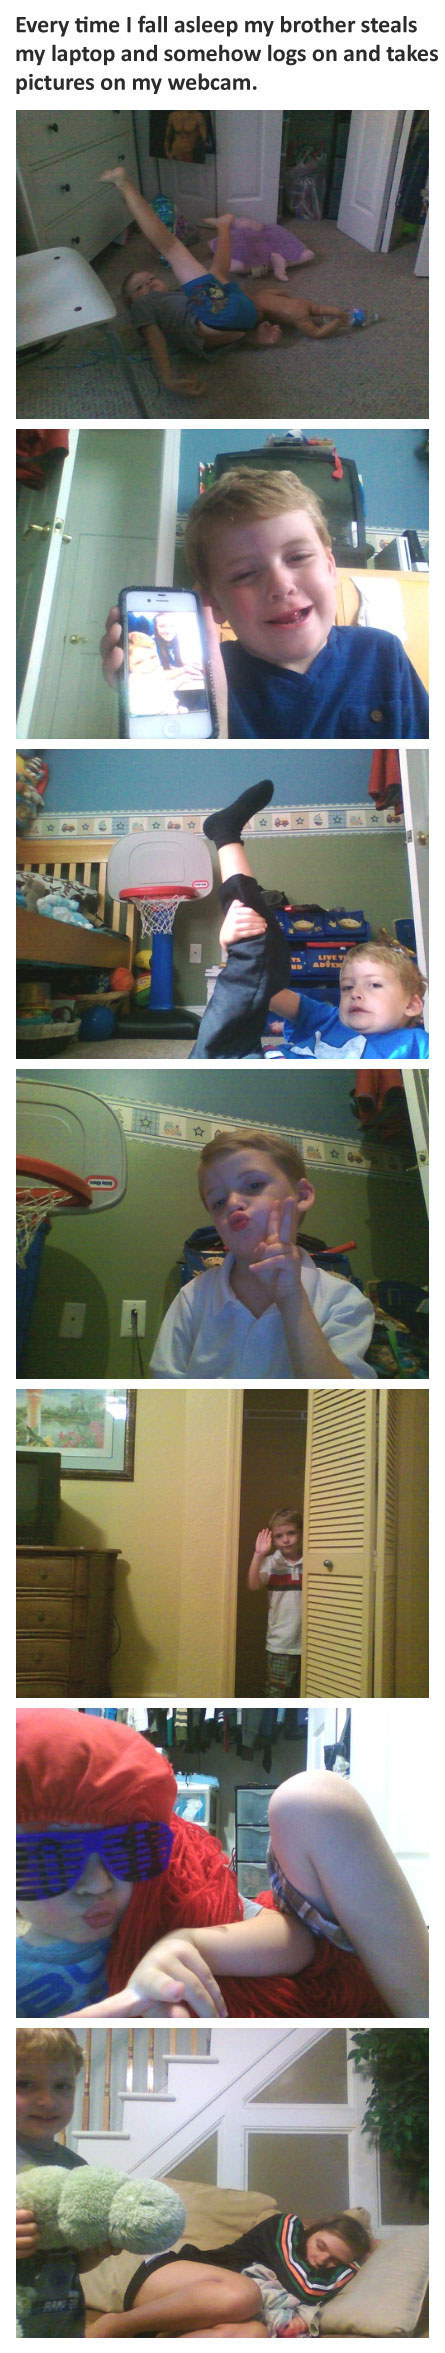 This little brother absolutely killing the selfie game.